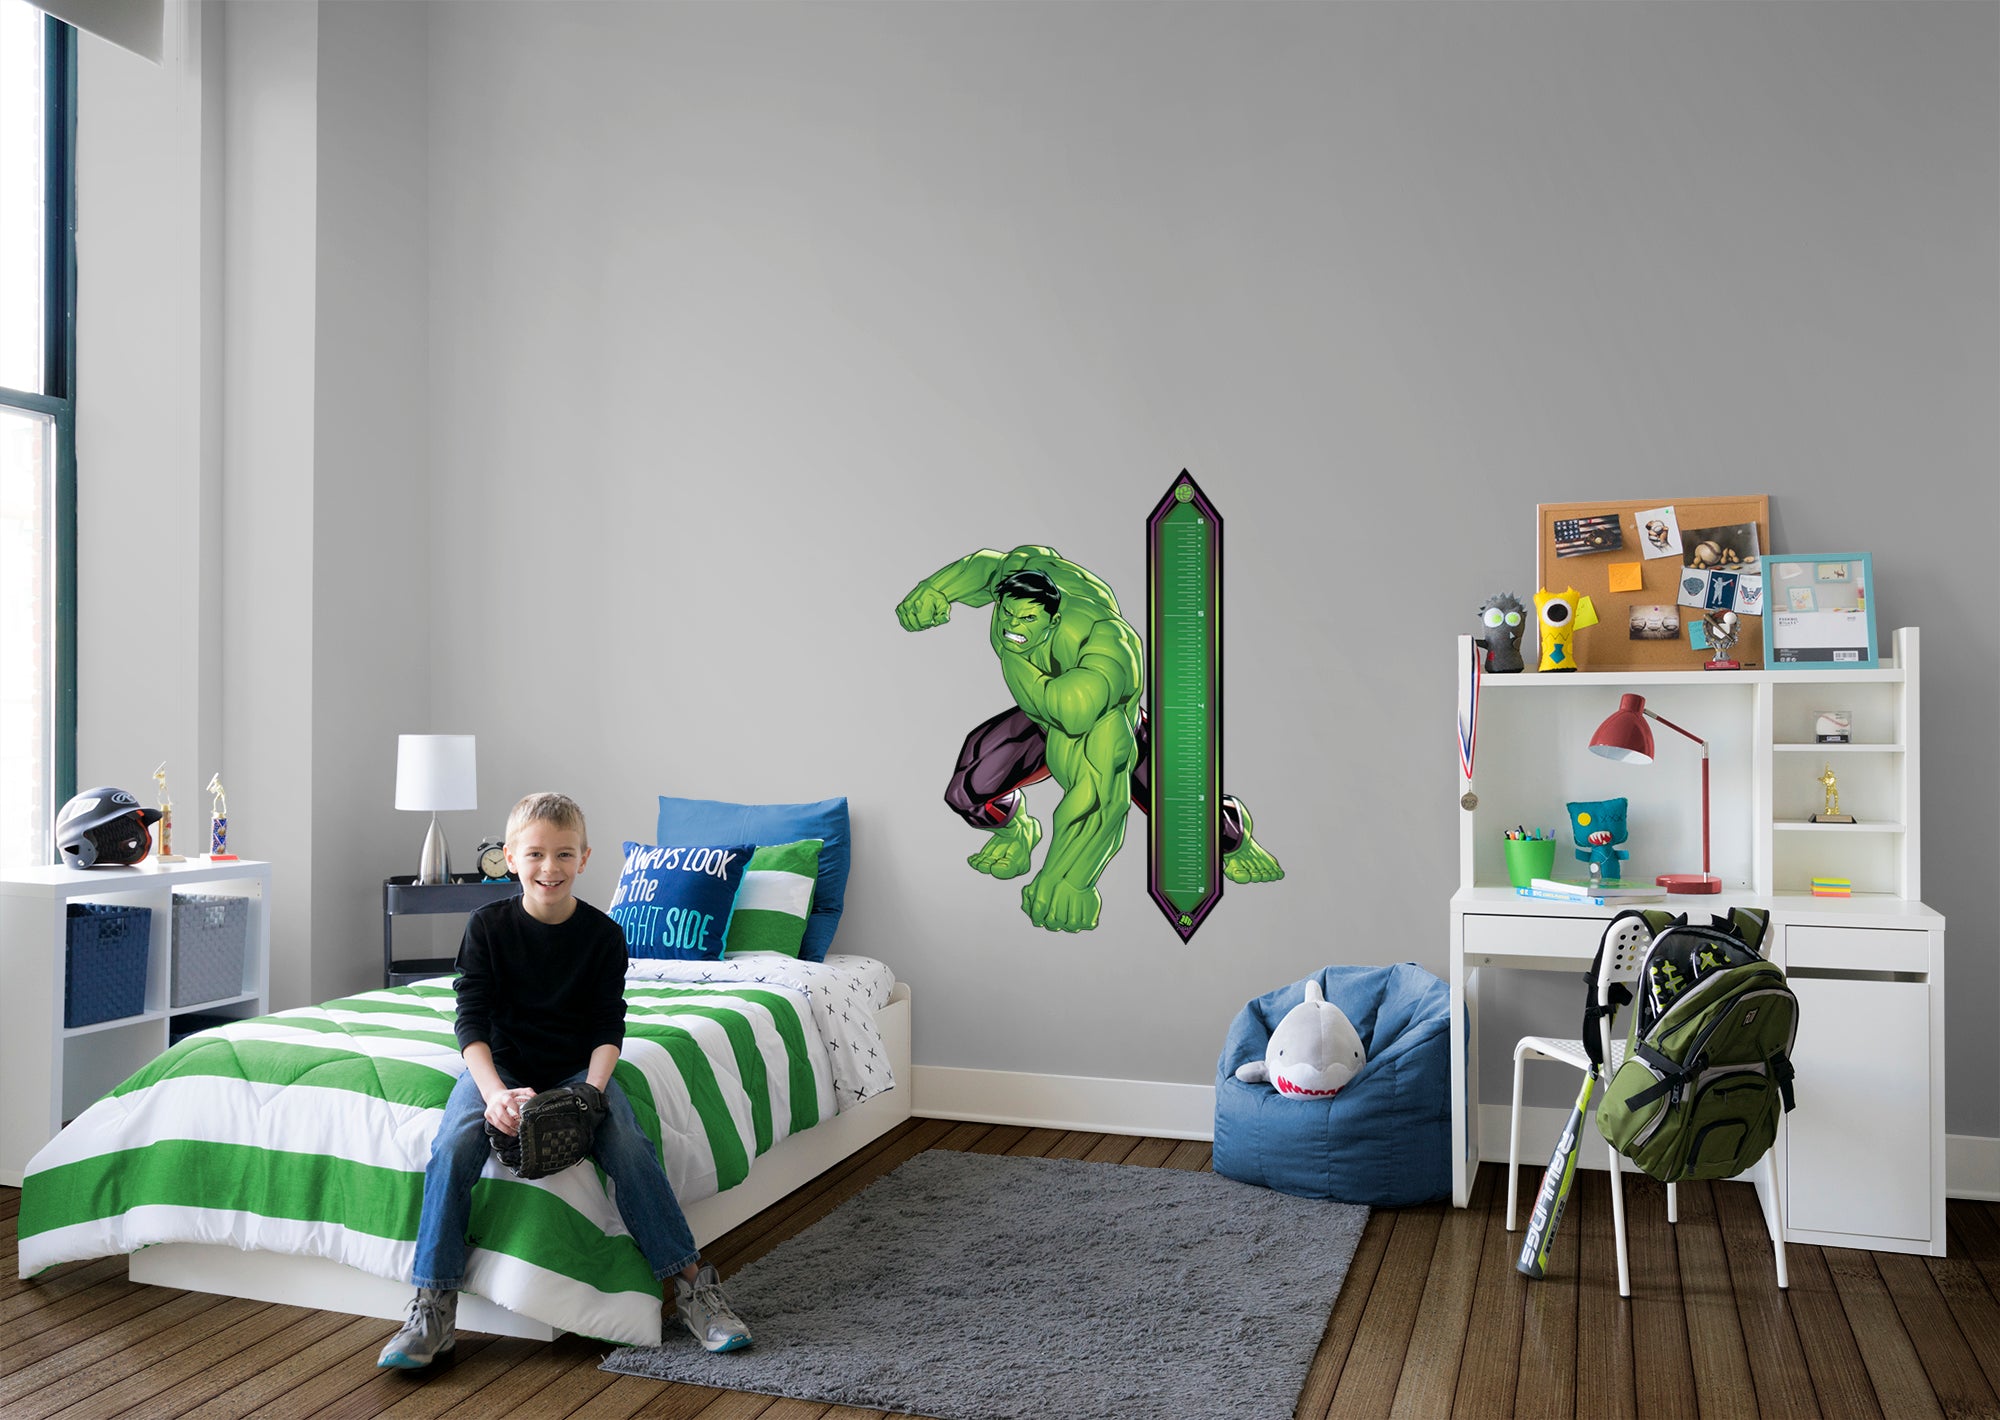 Incredible Hulk Growth Chart - Officially Licensed Marvel Removable Wall Decal by Fathead | Vinyl